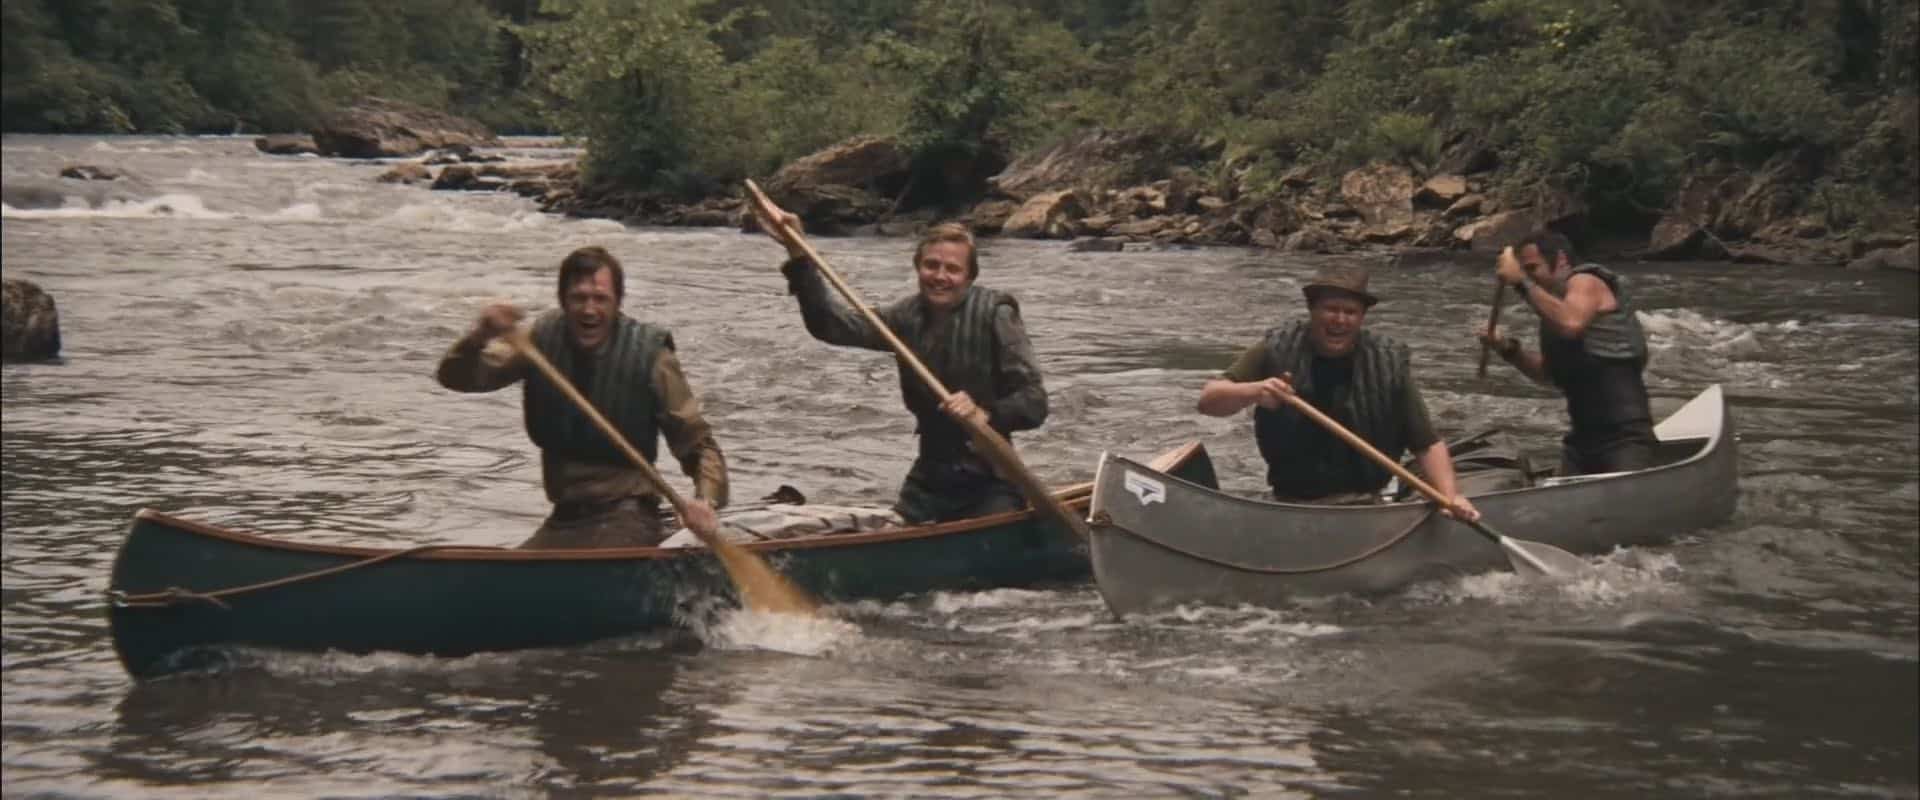 A desaturated scene from the river of Deliverance, which is beautiful in real life.